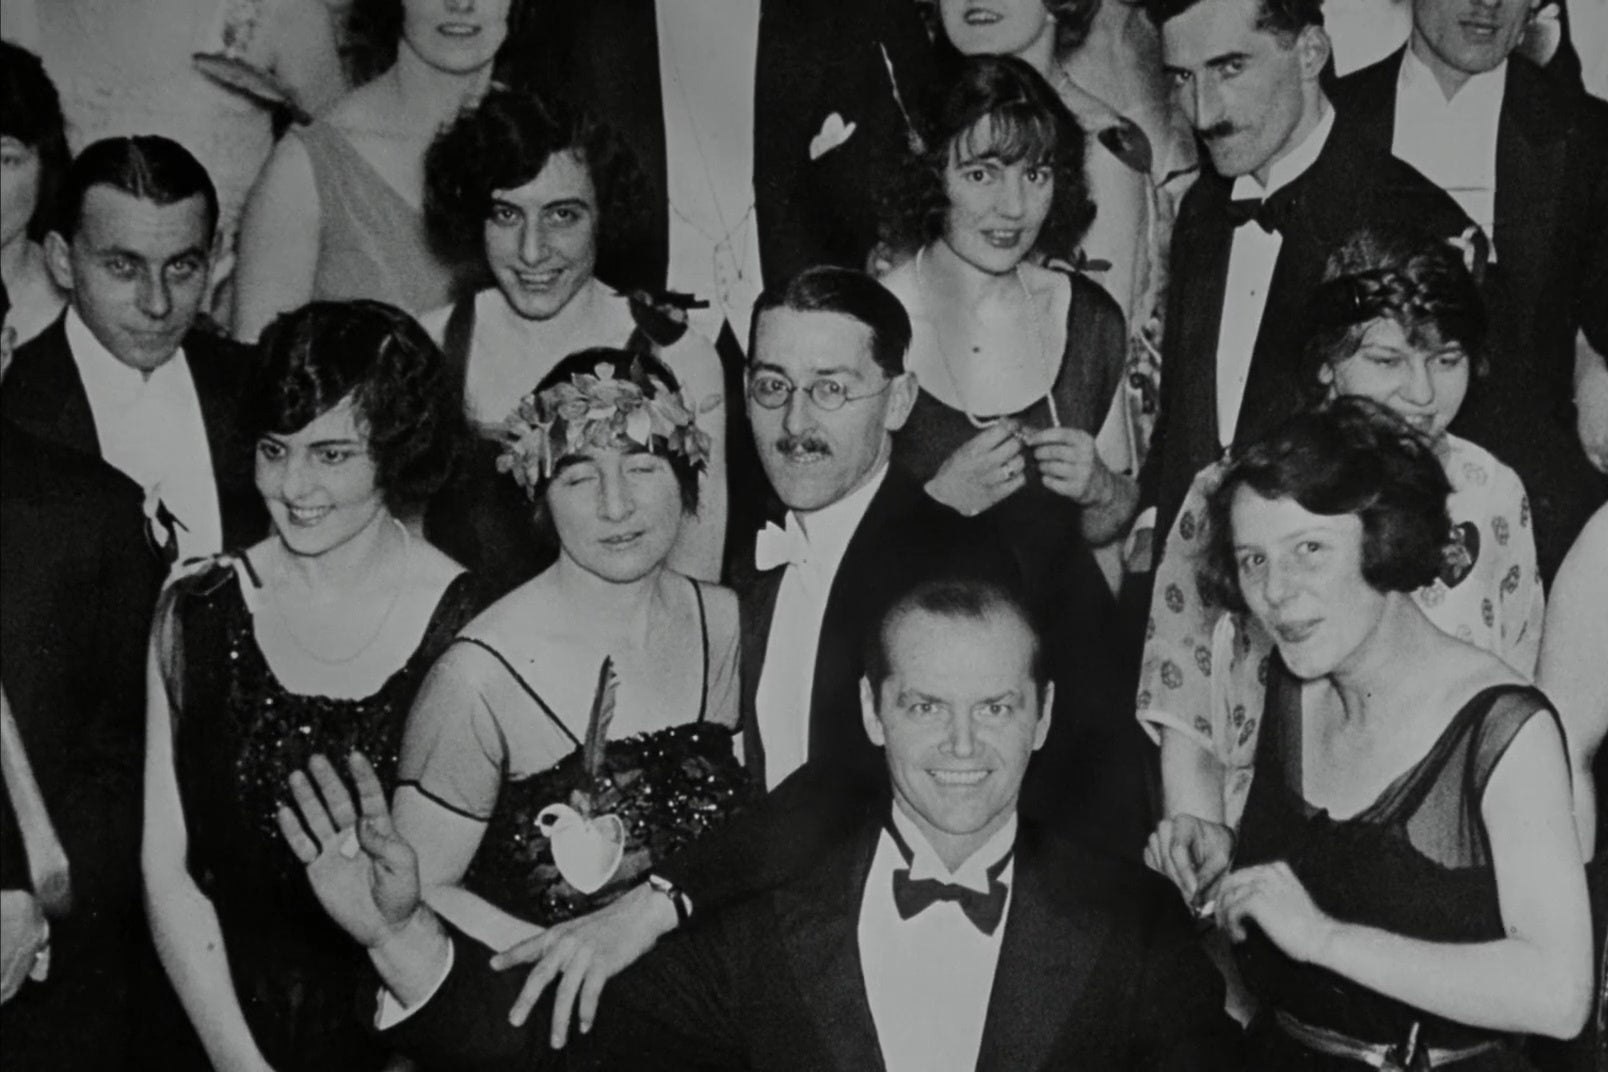 In a doctored photo from The Shining, Jack Nicholson waves from the front of a crowd attending a formal party.